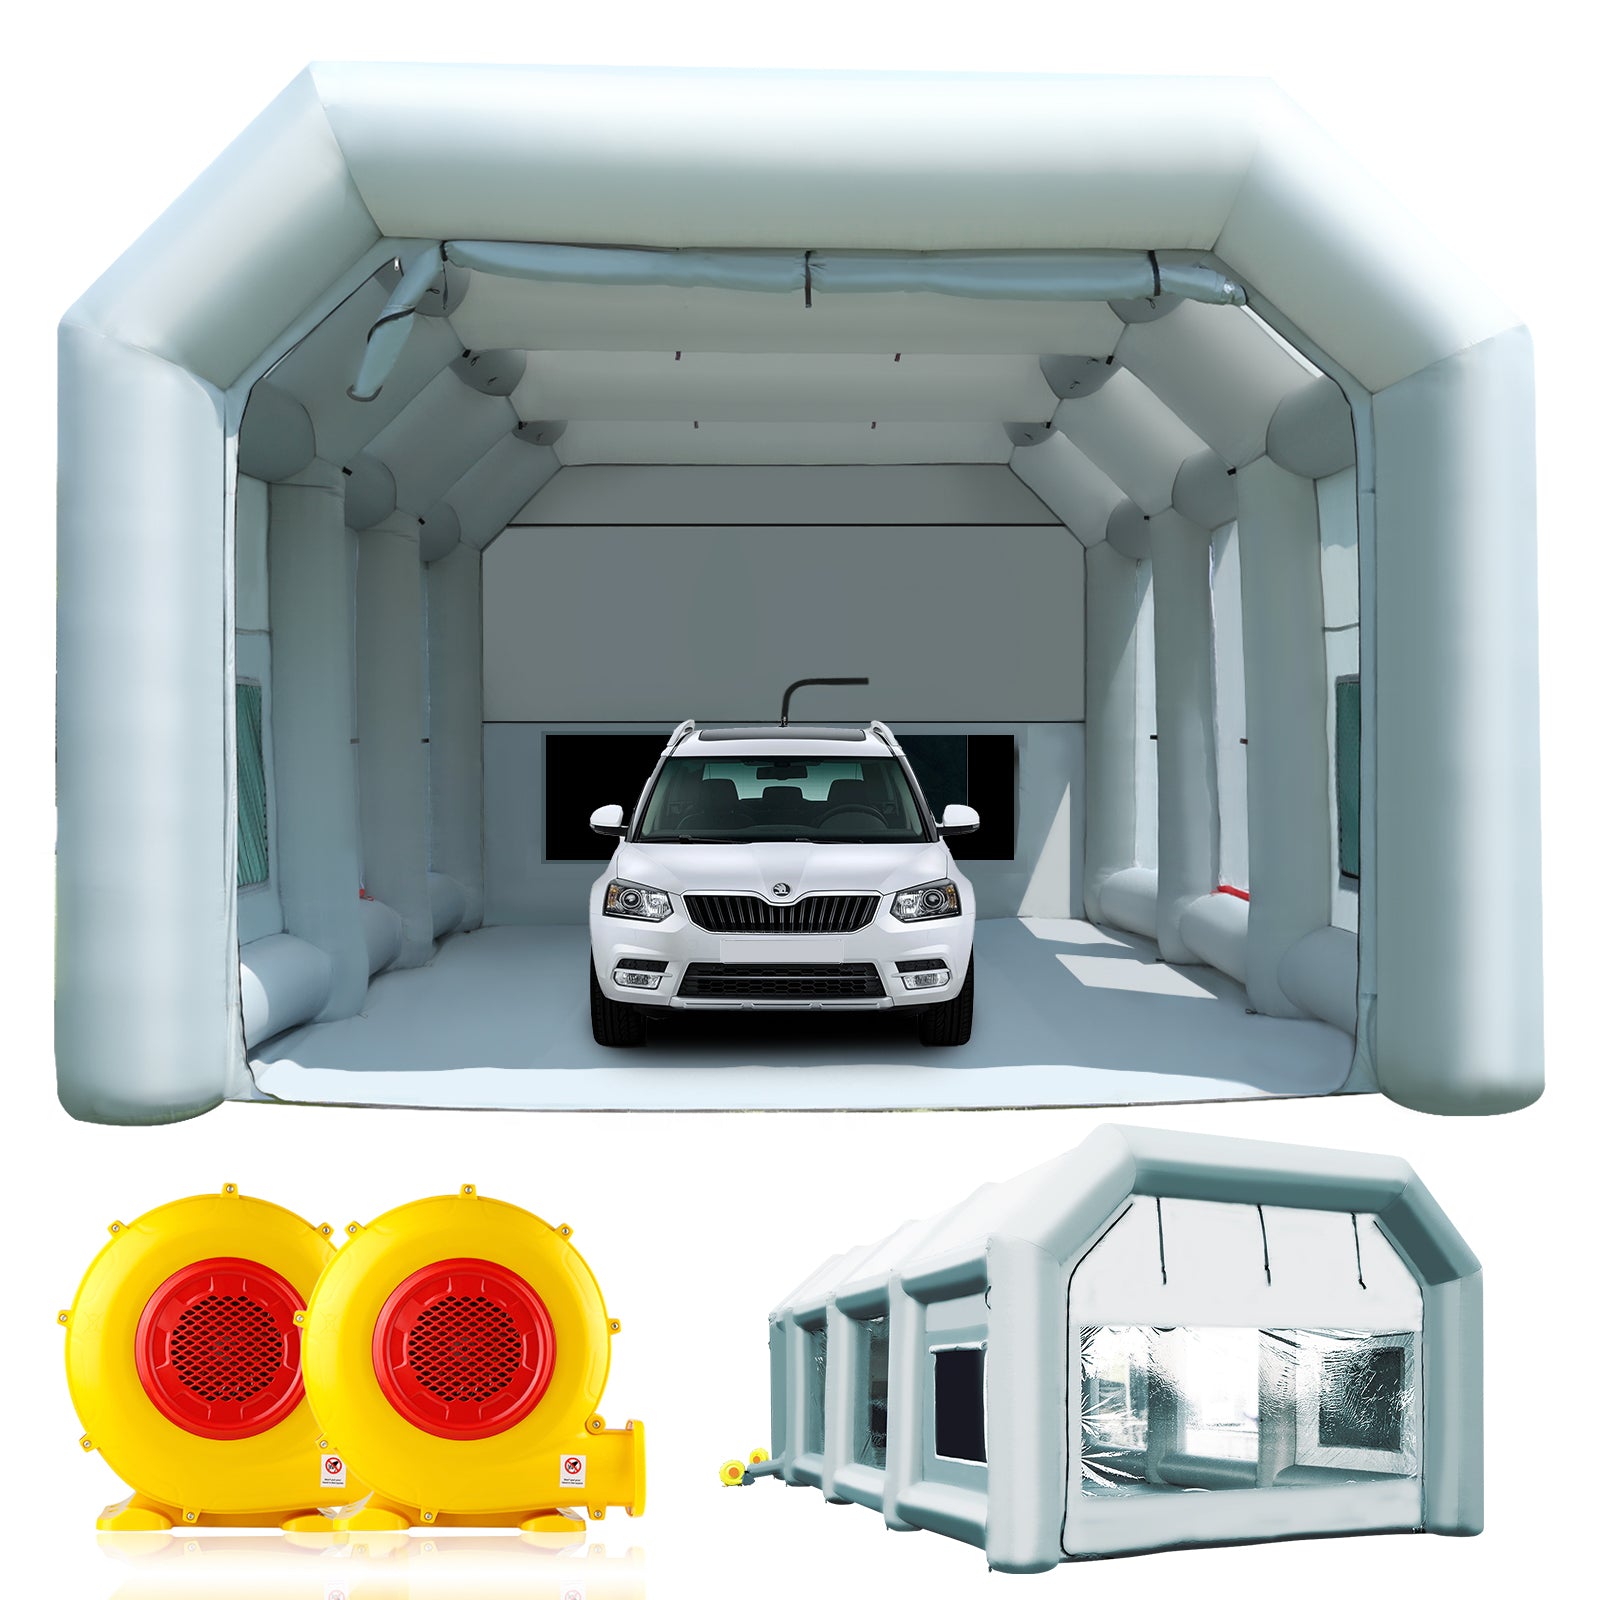 Sewinfla Professional Inflatable Paint Booth 33x16.5x11.5Ft with 2 Blowers (1100W+950W) & Air Filter System Portable Paint Booth Tent Garage Inflatable Spray Booth Painting for Cars